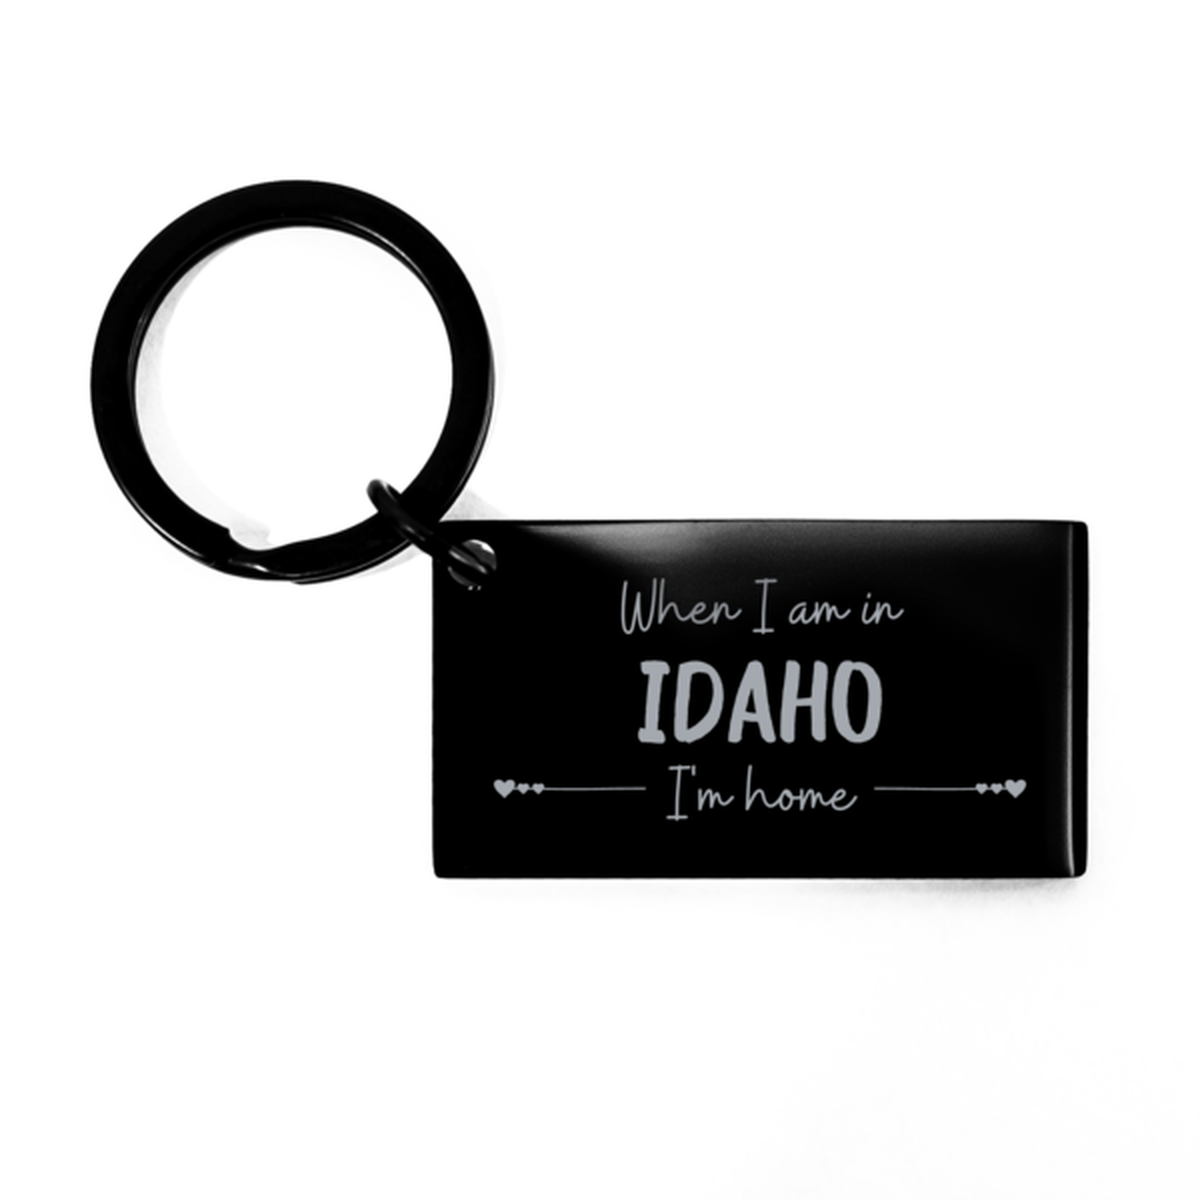 When I am in Idaho I'm home Keychain, Cheap Gifts For Idaho, State Idaho Birthday Gifts for Friends Coworker